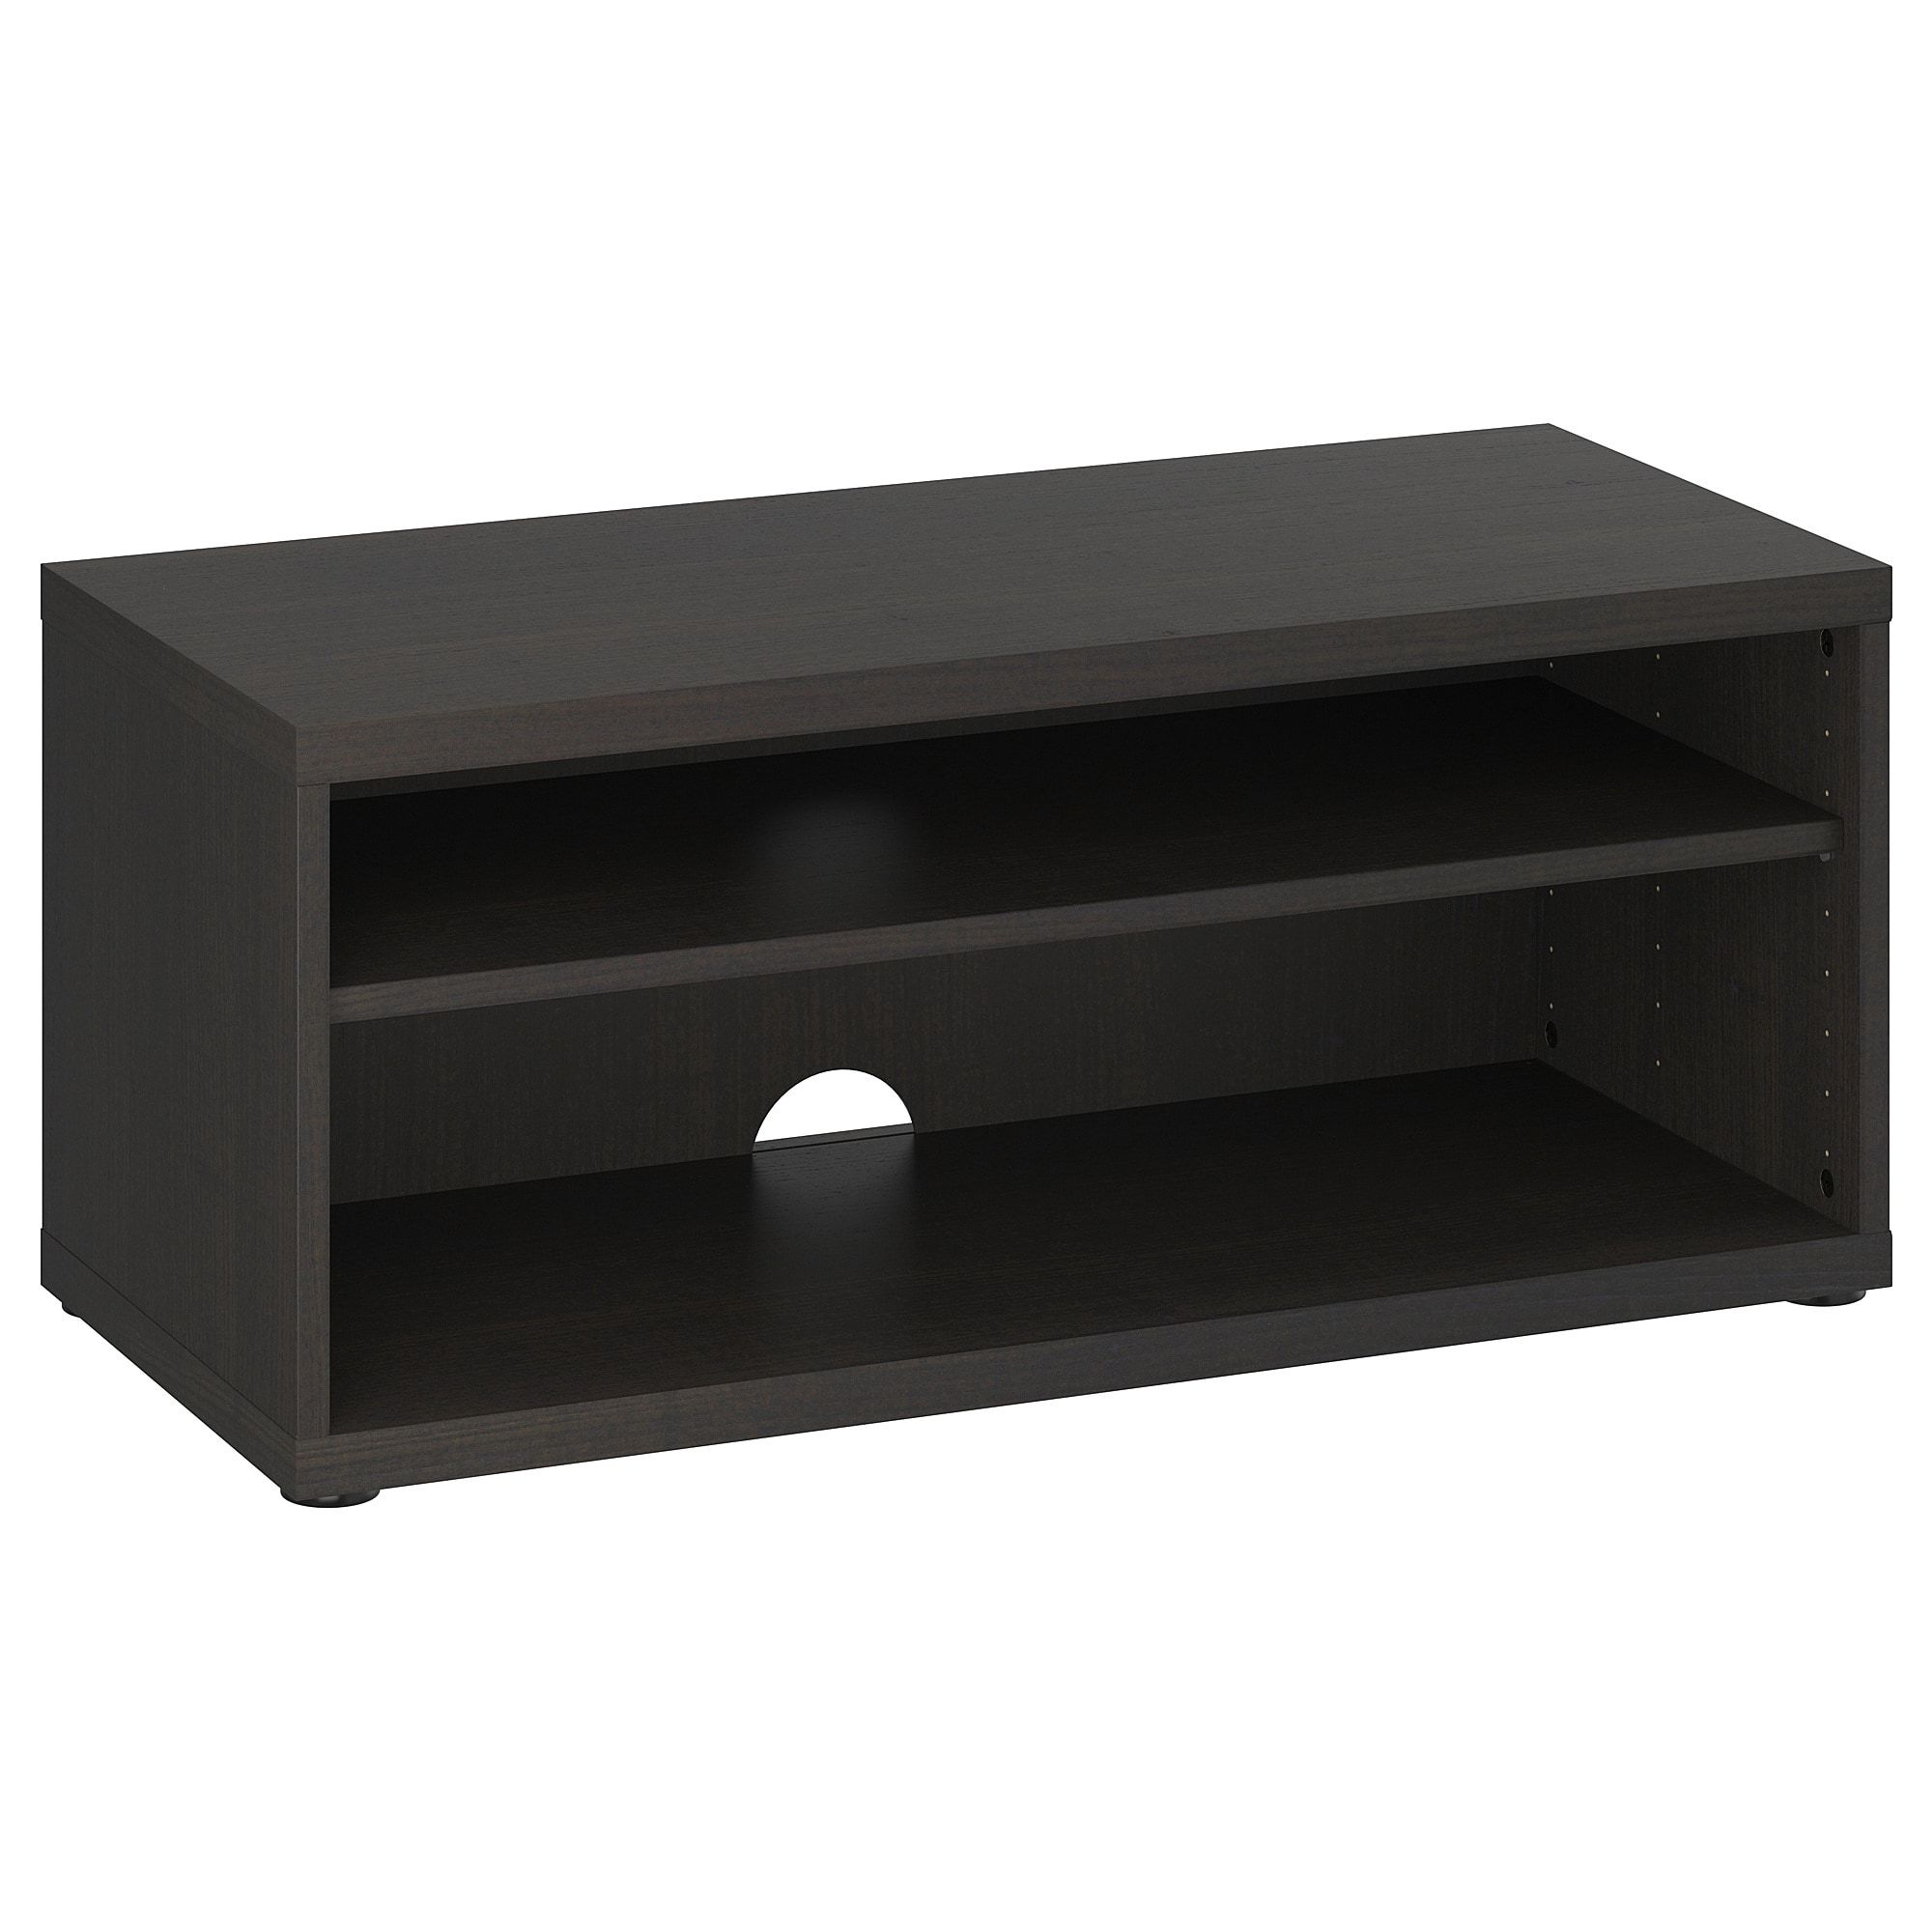 Ikea Ireland – Dublin For Most Popular Telly Tv Stands (View 2 of 20)